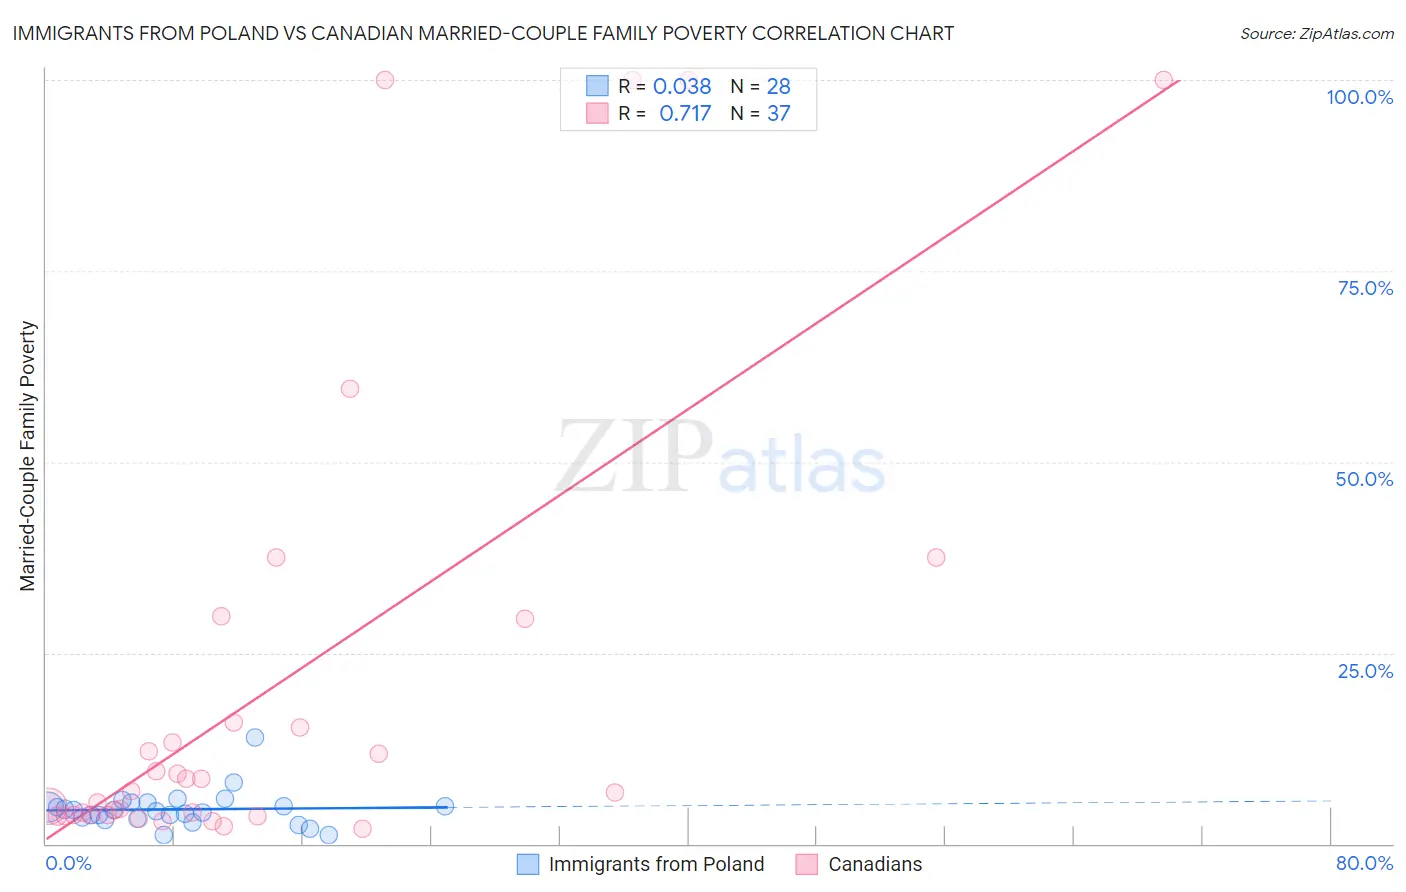 Immigrants from Poland vs Canadian Married-Couple Family Poverty